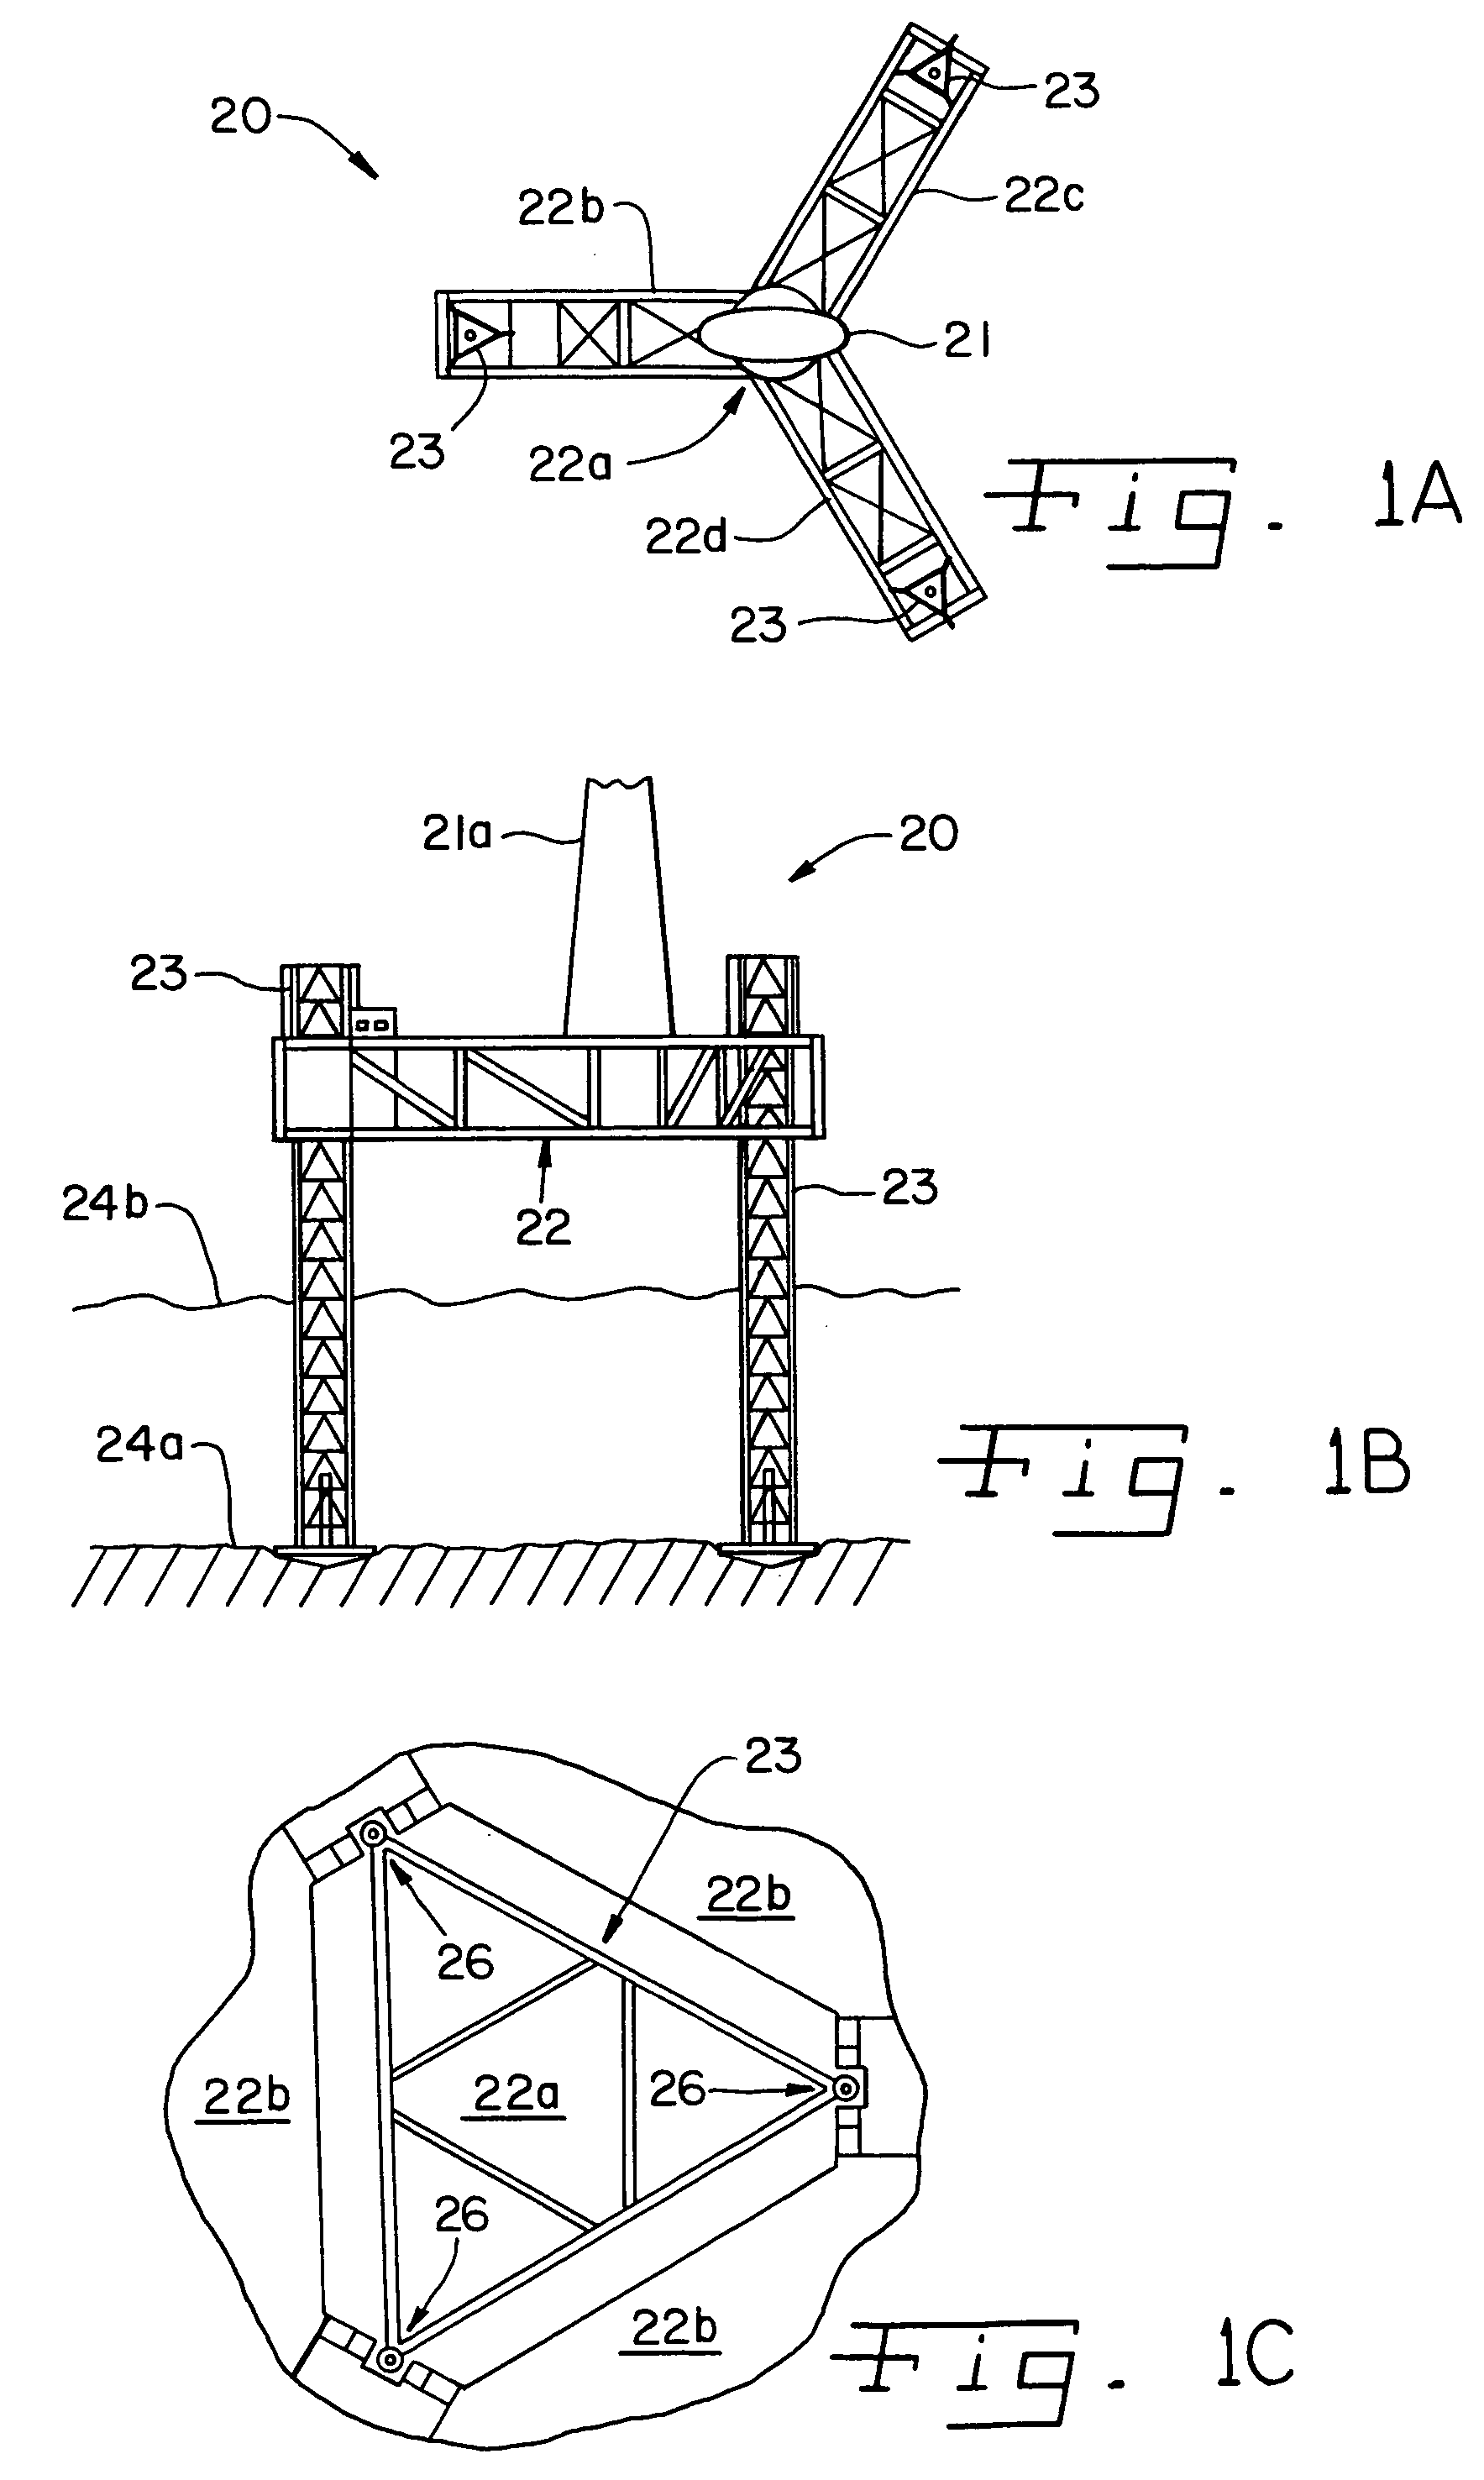 Mobile wind-driven electric generating systems and methods